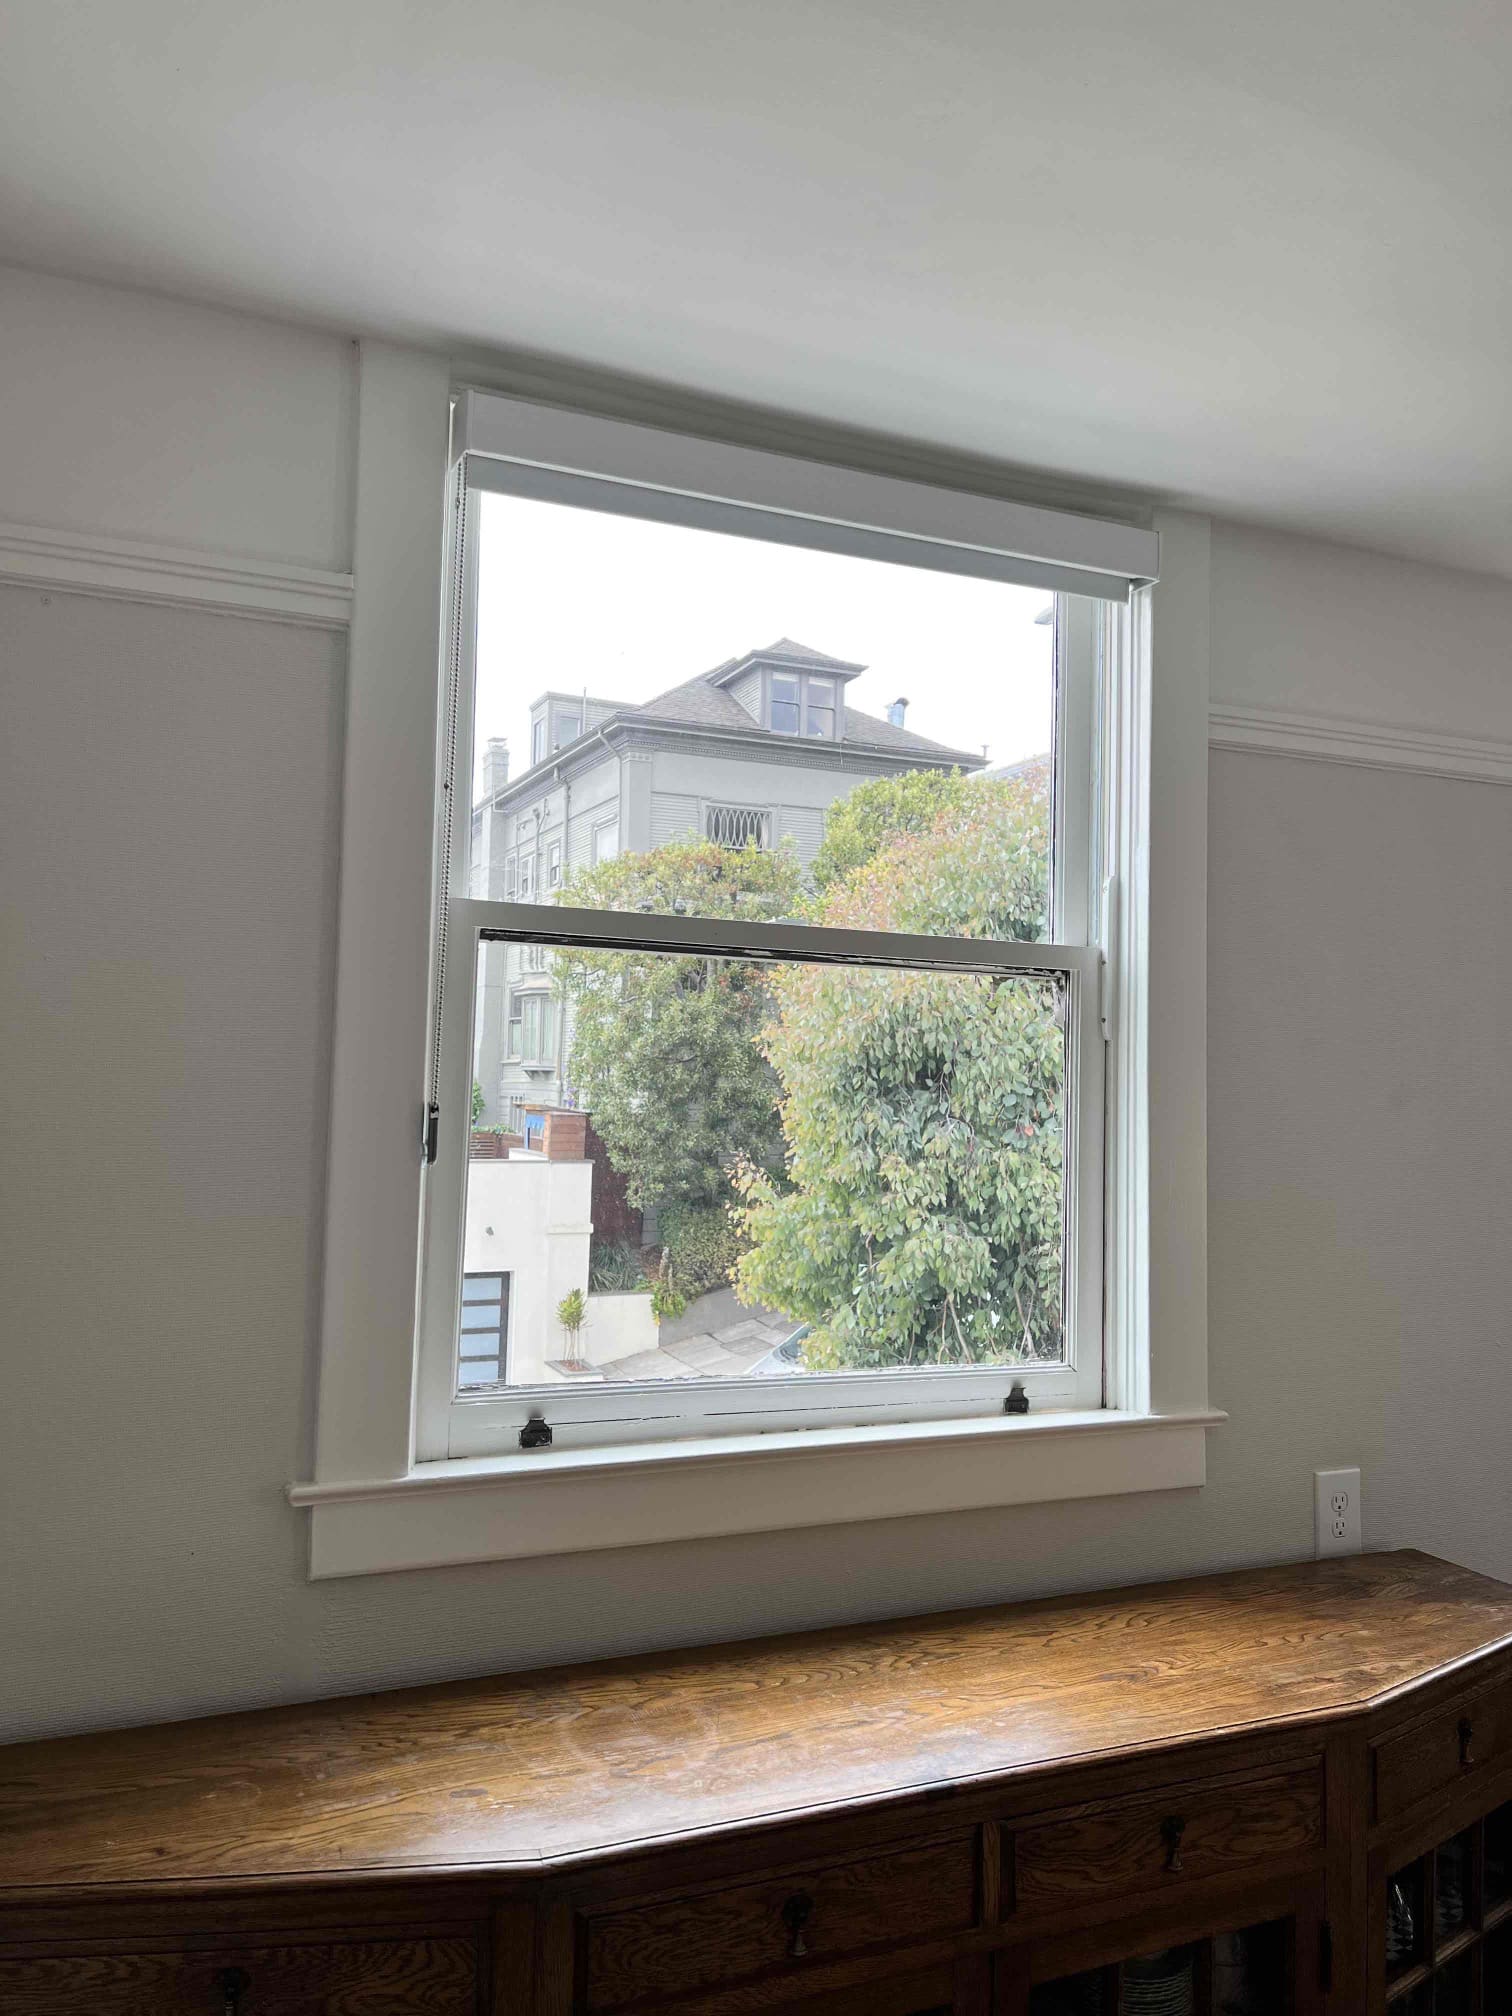 A lovely home in San Francisco, transformed with 3M Prestige 70 Window Film. Installed by ClimatePro.